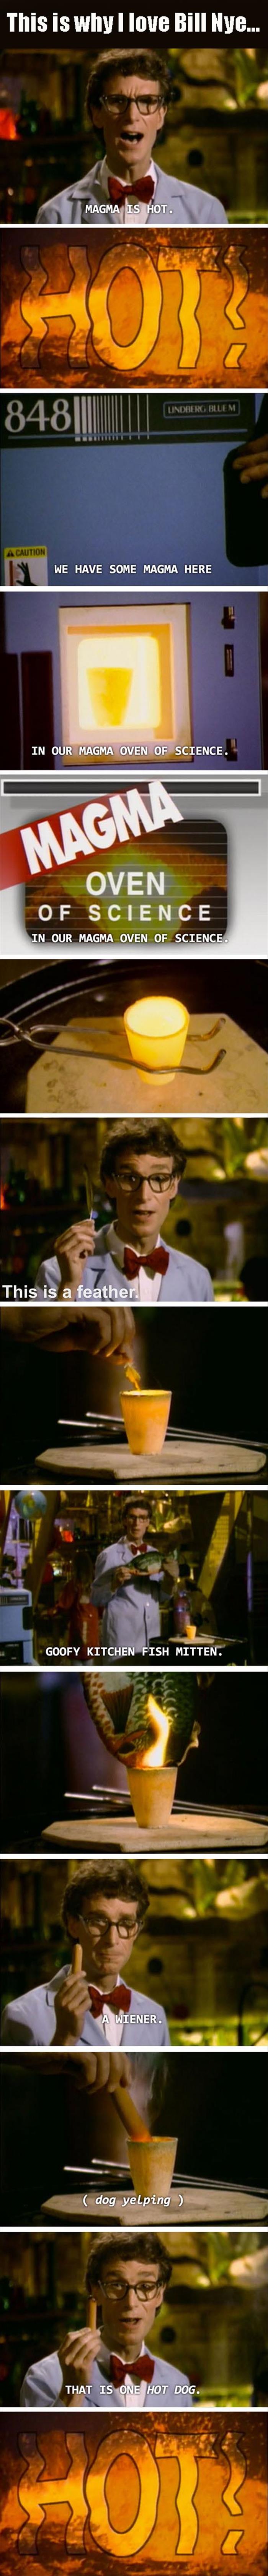 this is why I love Bill Nye